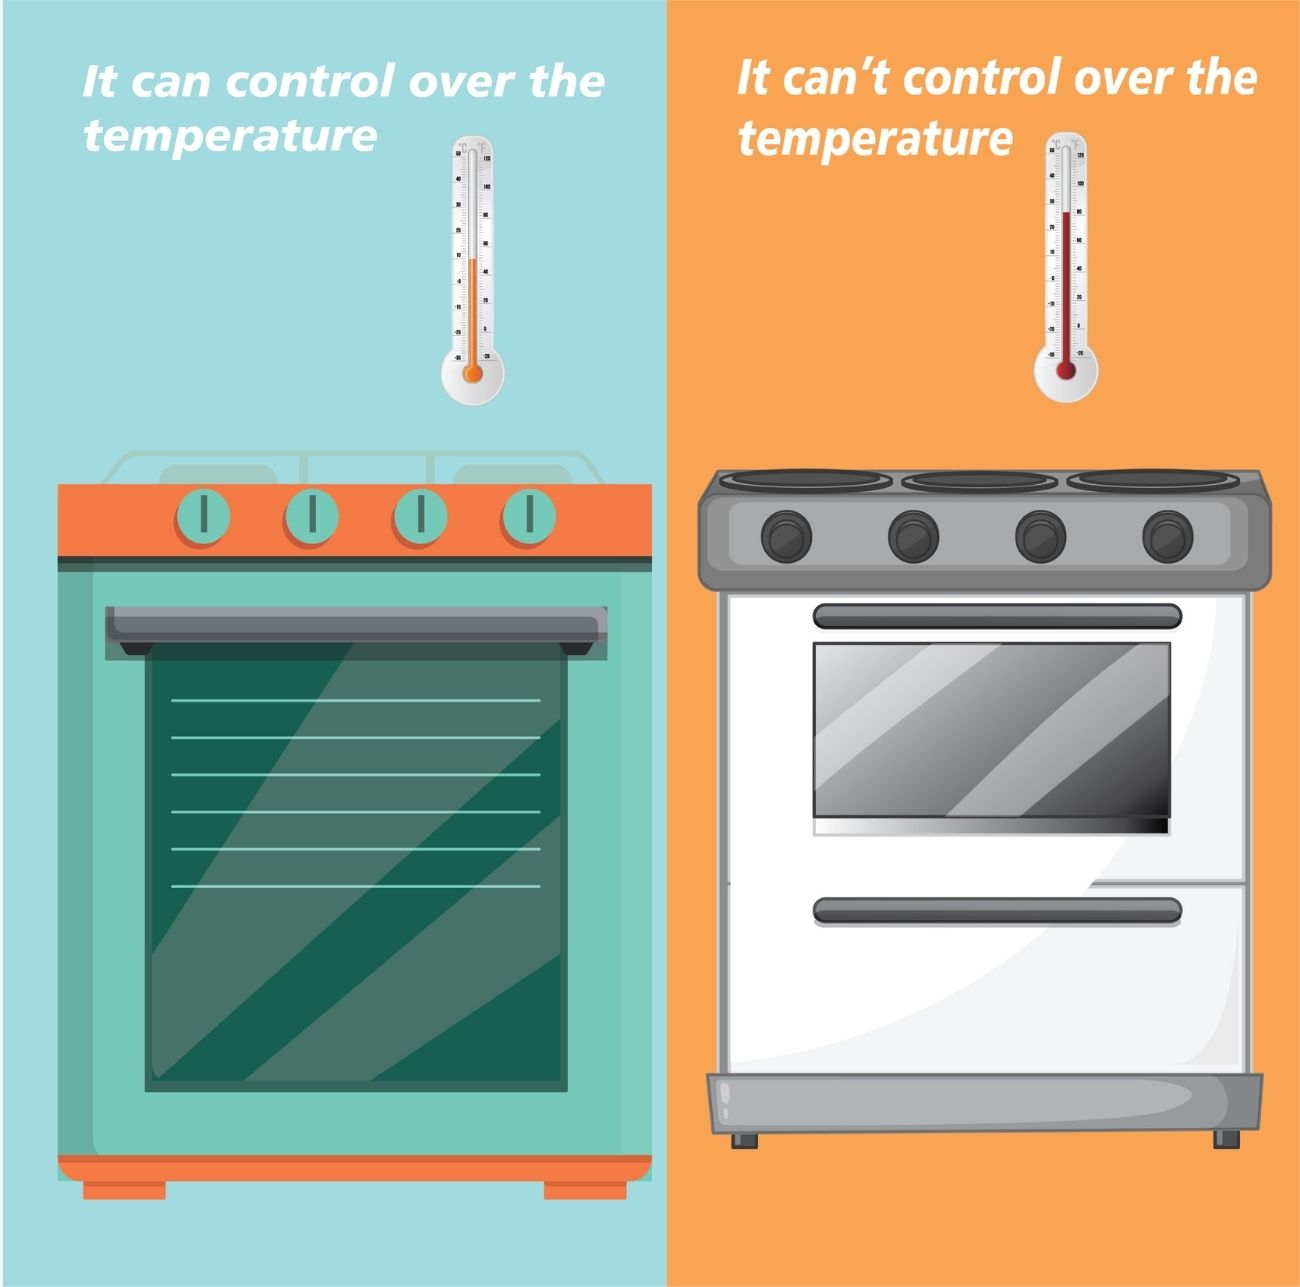 gas stove can control the temperature but you can't control the temperature in electric countertop stove